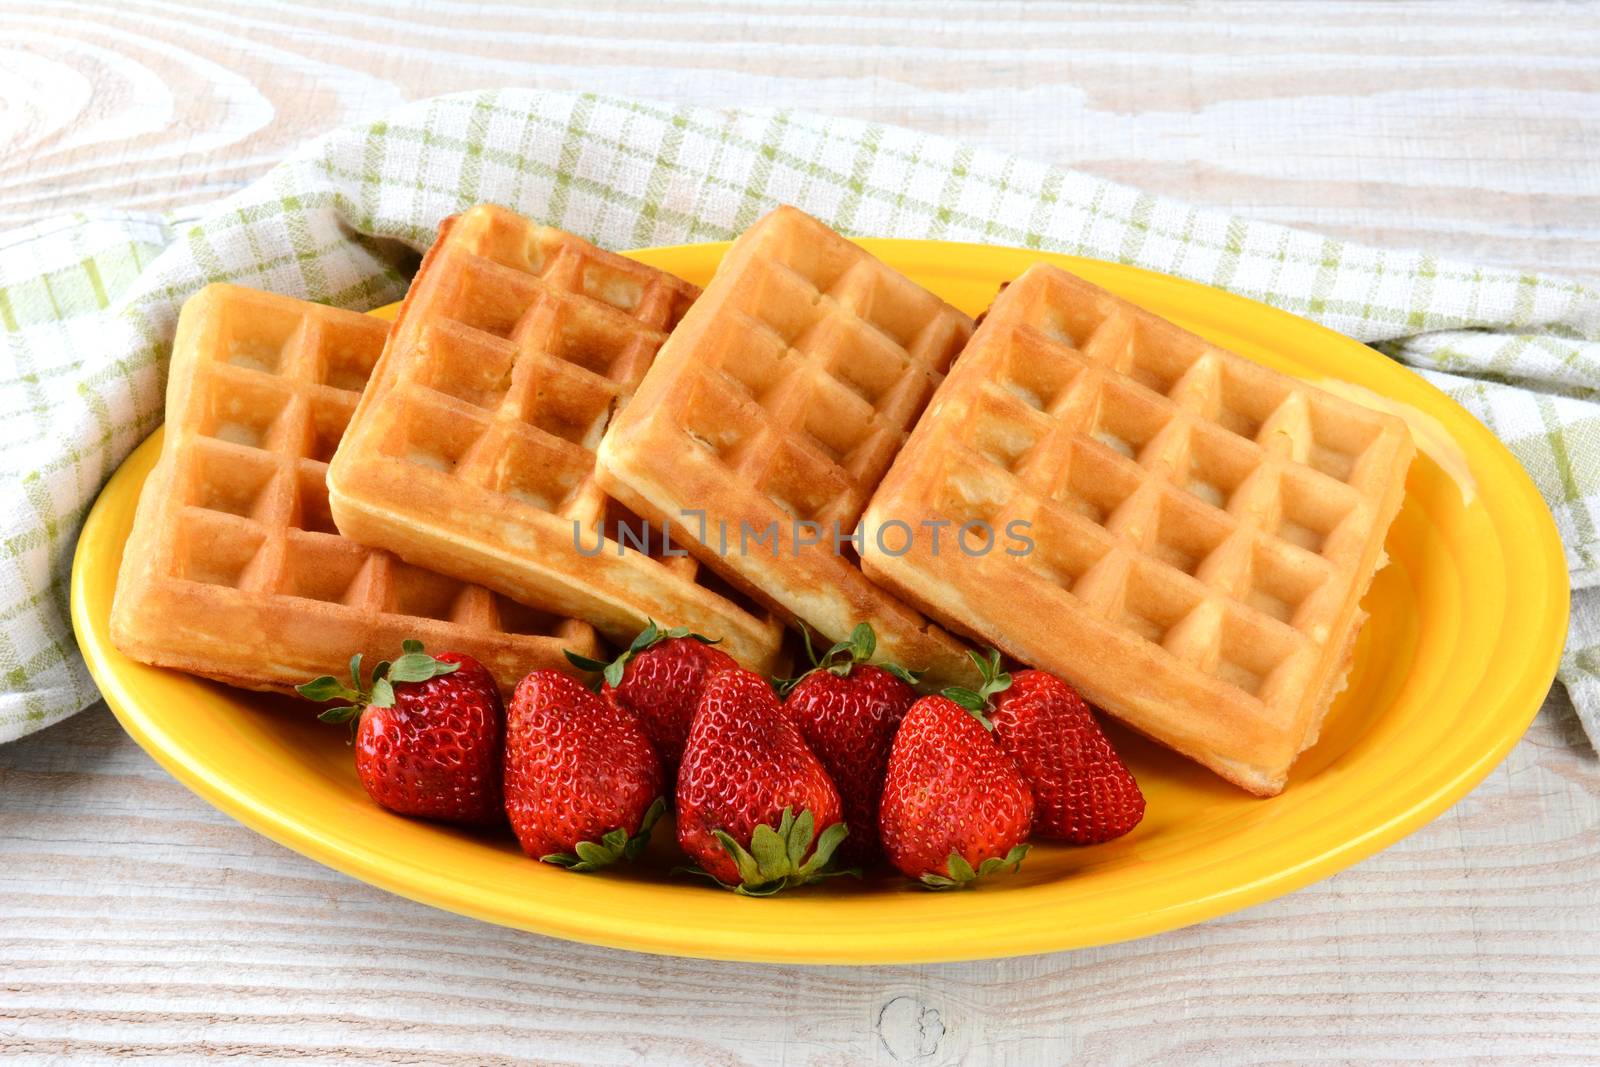 Plate of Waffles and Strawberries by sCukrov